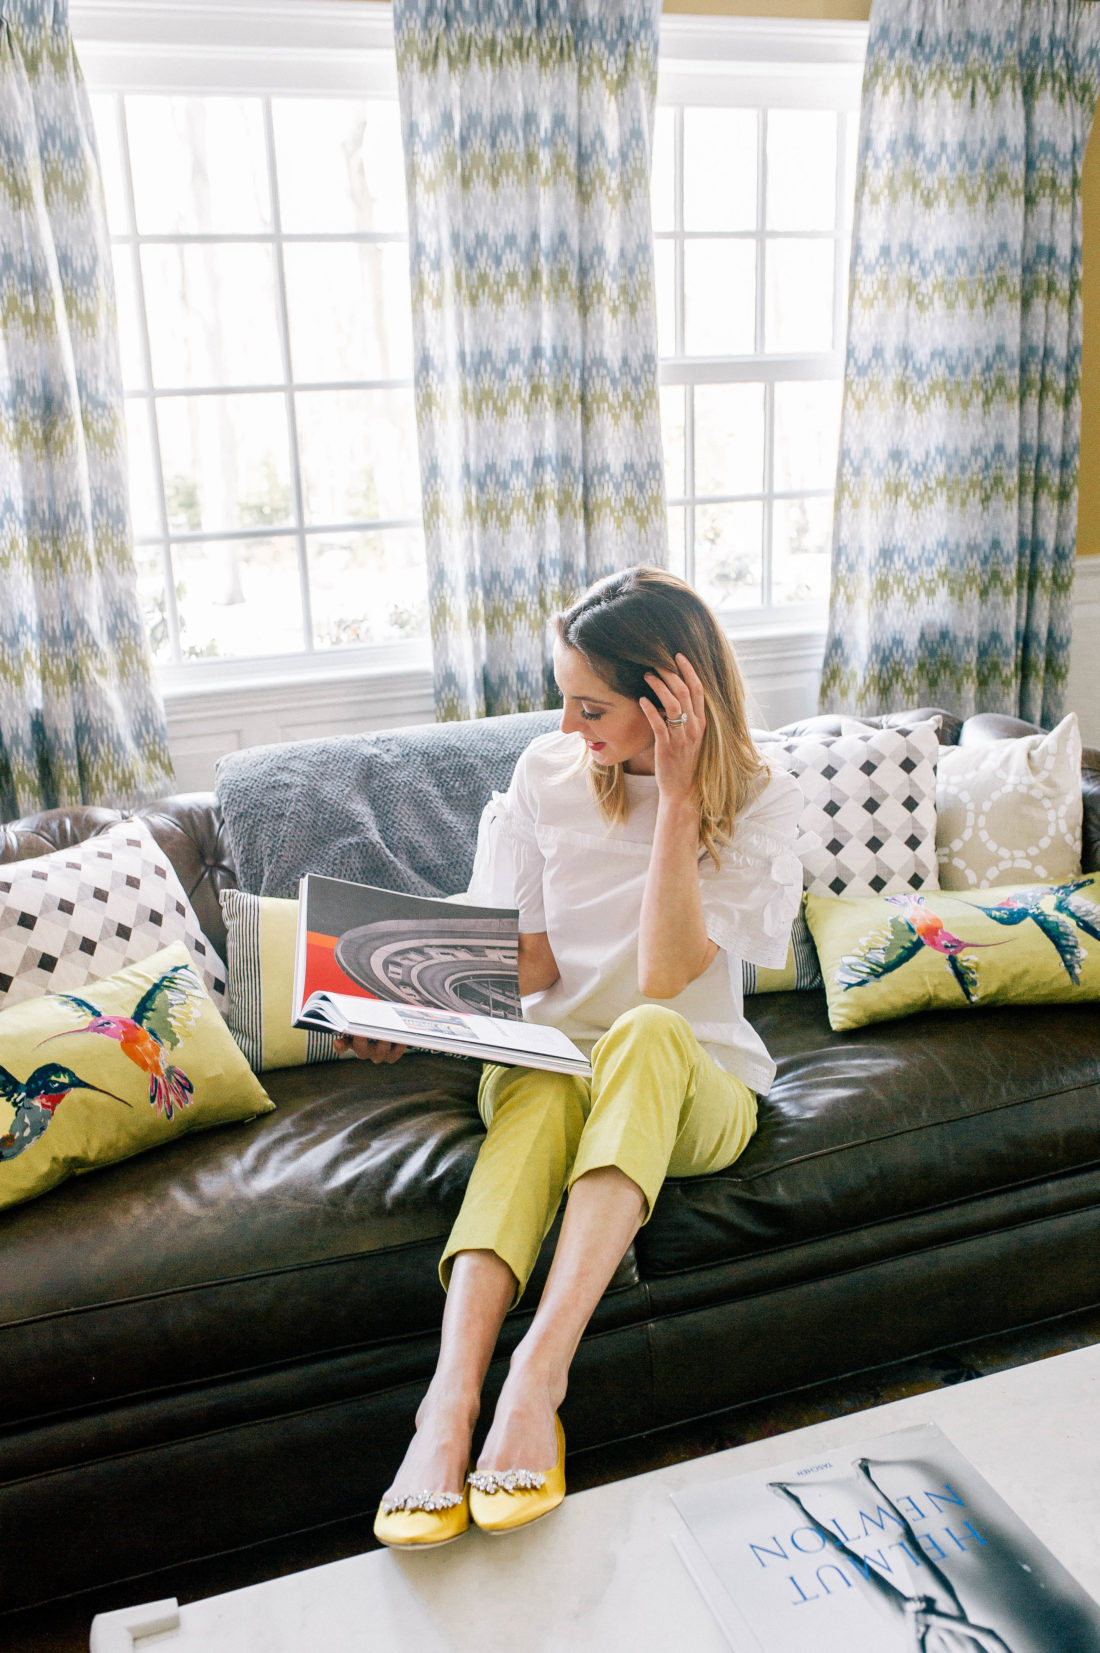 Eva Amurri Martino wears a pair of canary yellow manolo blahnik flats in the formal living room of her Connecticut home